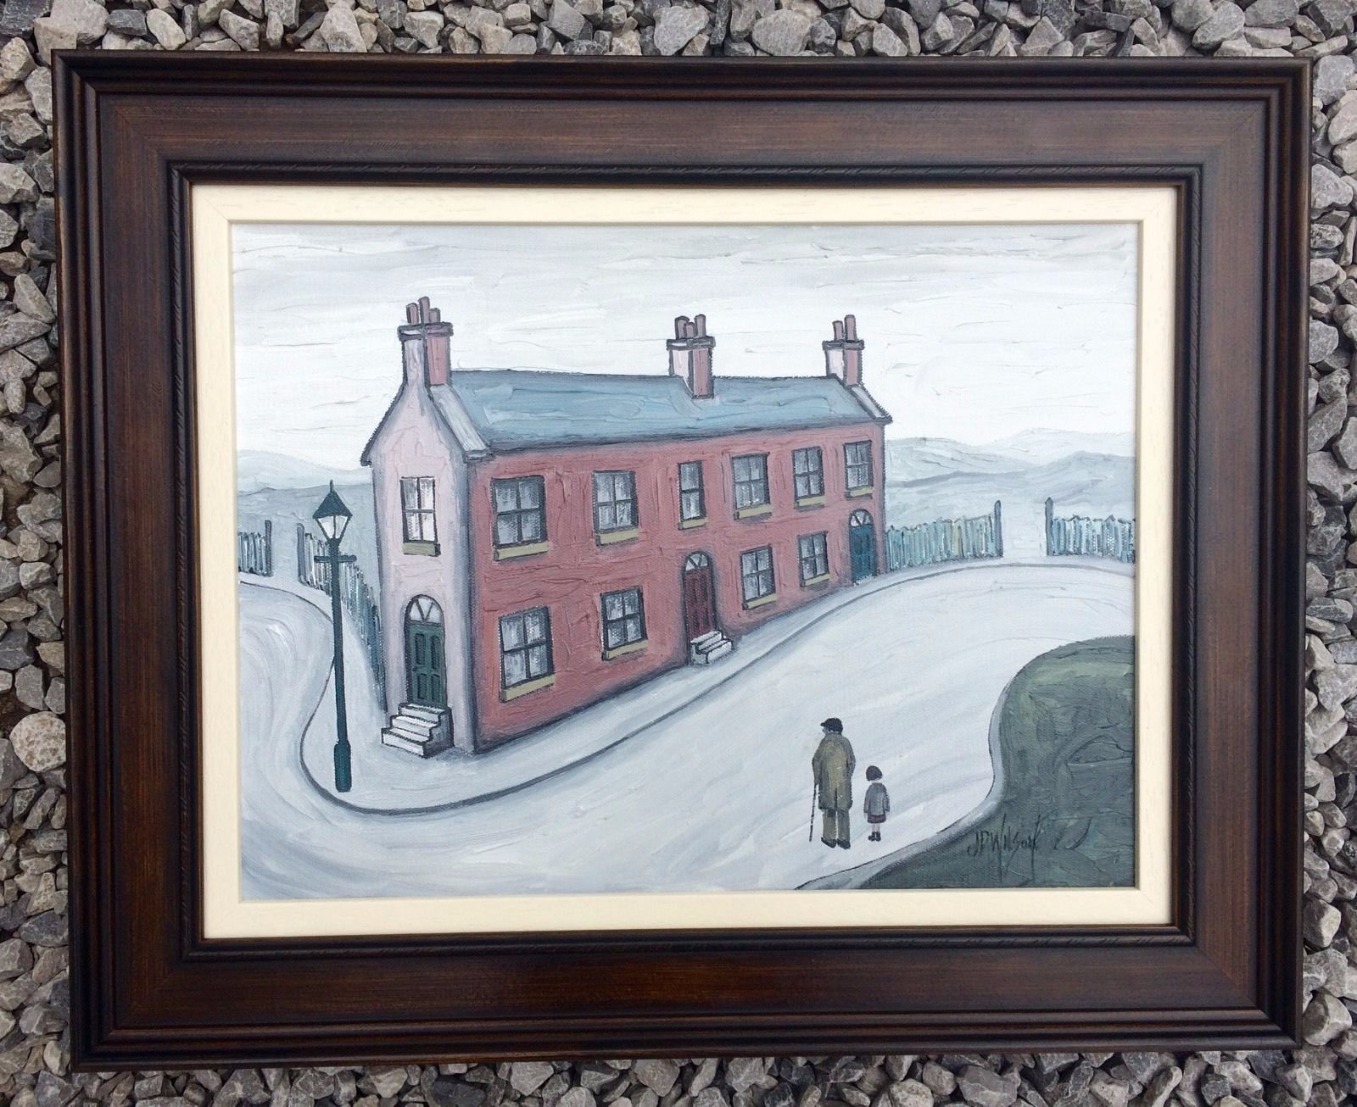 The Little Terrace by John D Wilson, Local | Lowry | Family | Northern | Nostalgic | Landscape